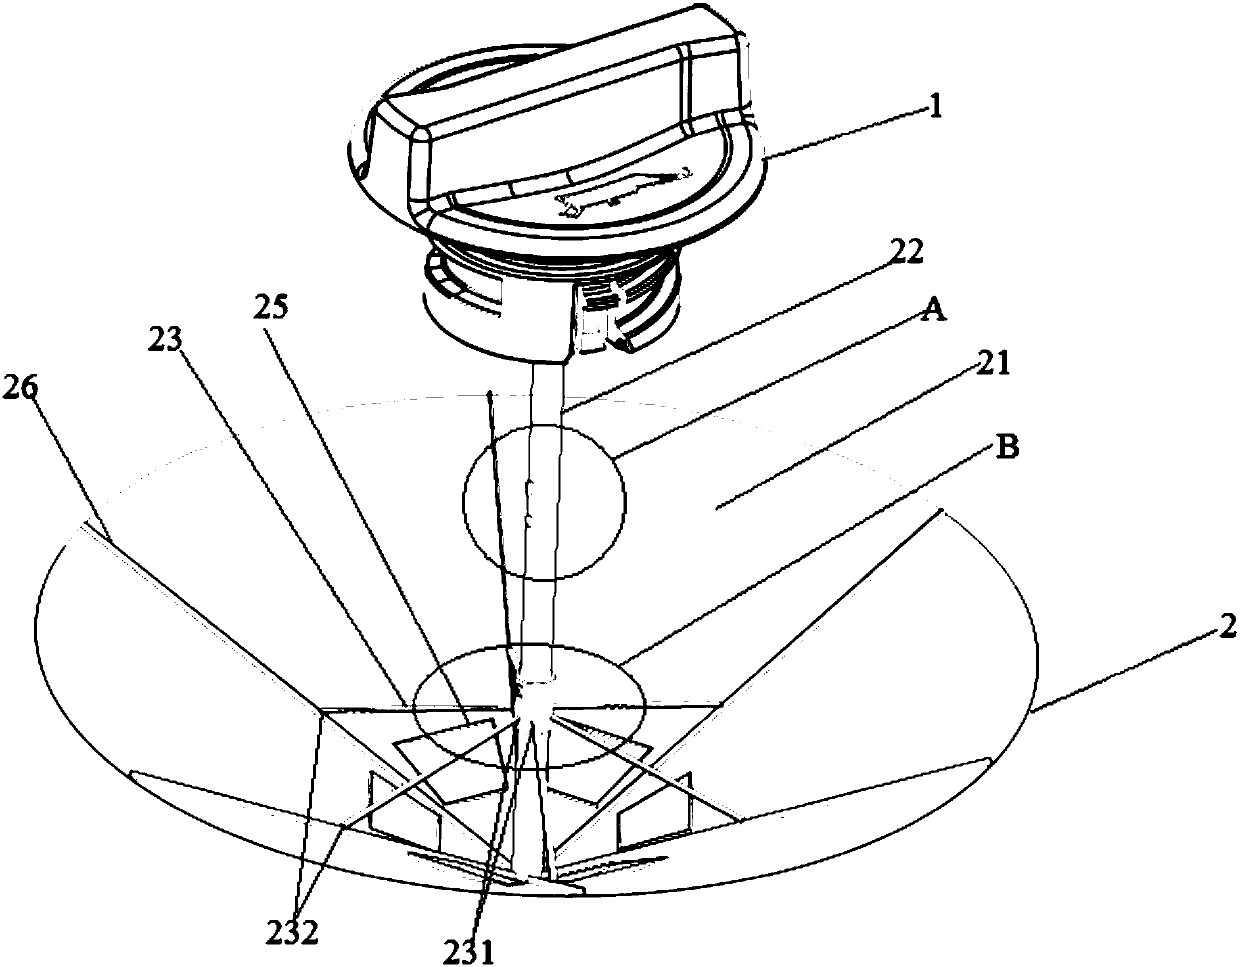 Filler cap structure for vehicles